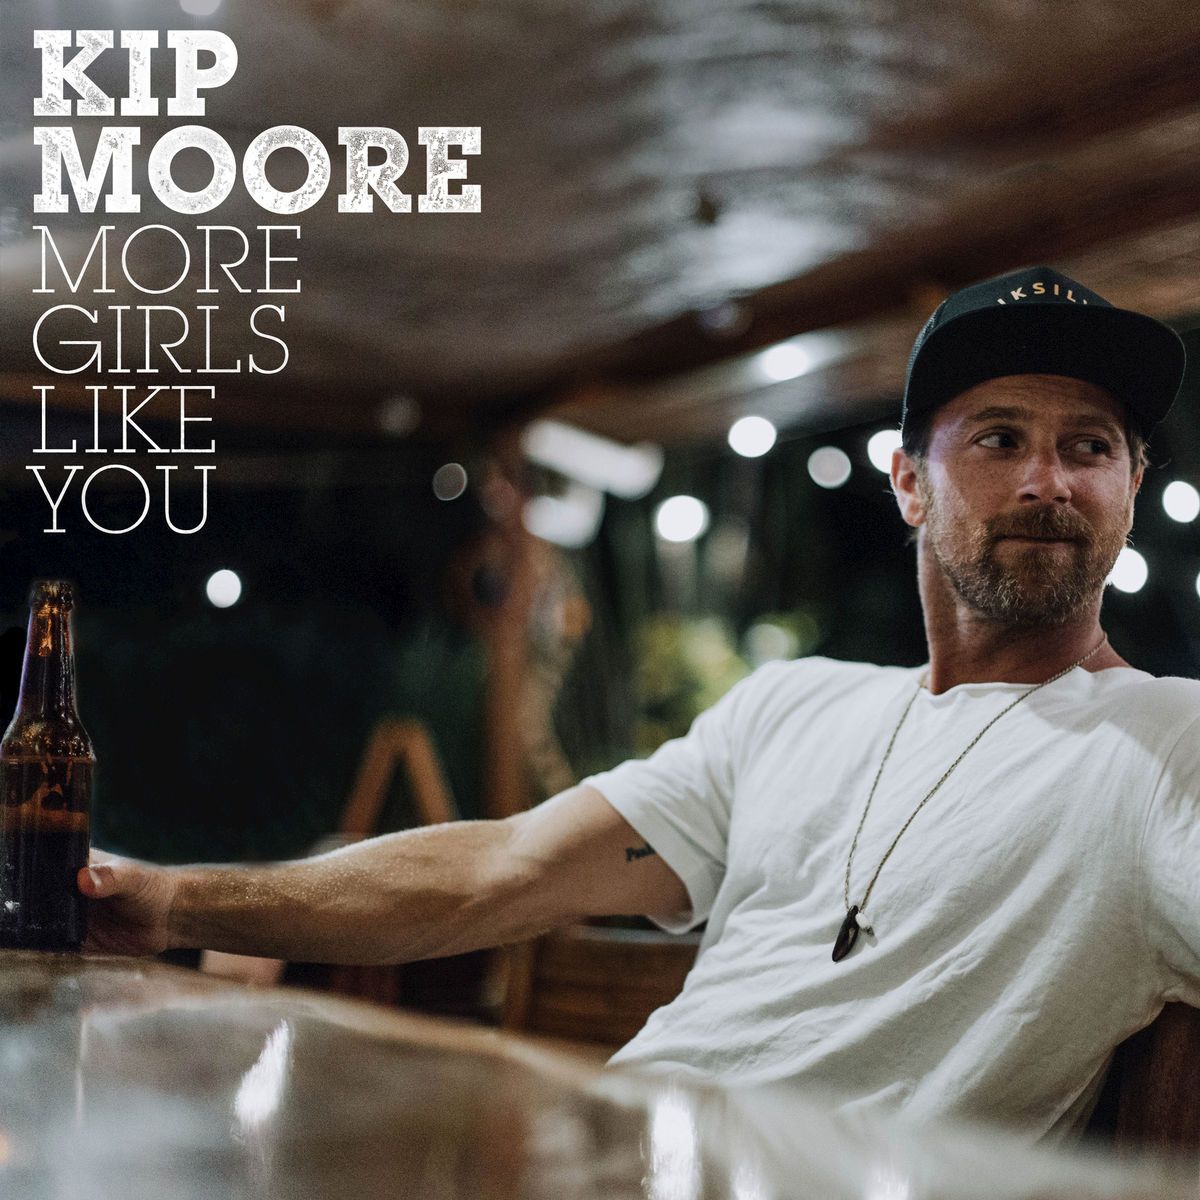 KIP MOORE SPARKS WANDERLUST WITH NEW LYRIC VIDEO FOR “MORE GIRLS LIKE YOU” PREMIERING EXCLUSIVELY ON TRAVEL & LEISURE